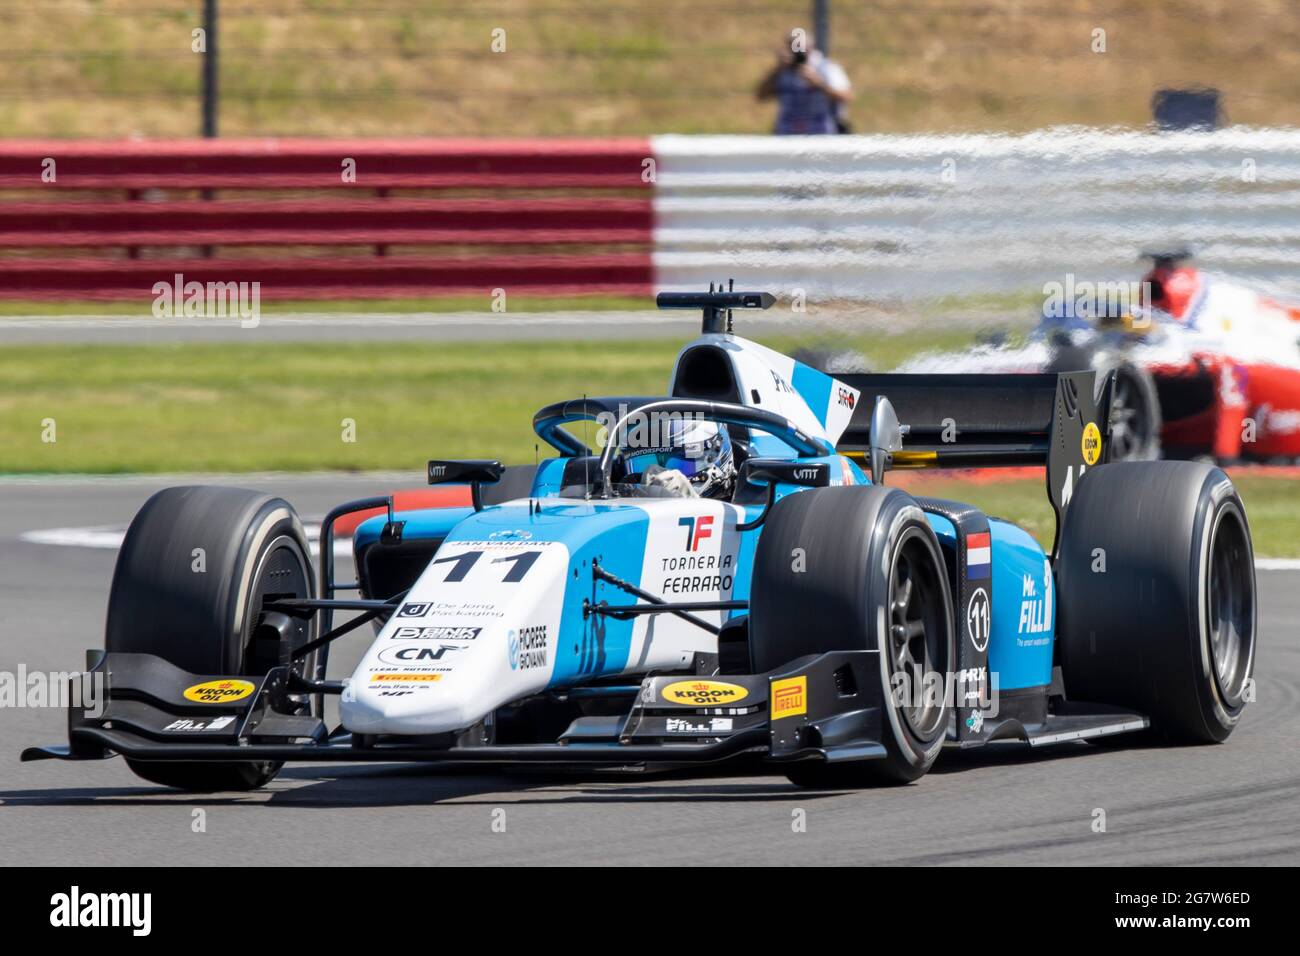 Mp Motorsport High Resolution Stock Photography and Images - Alamy